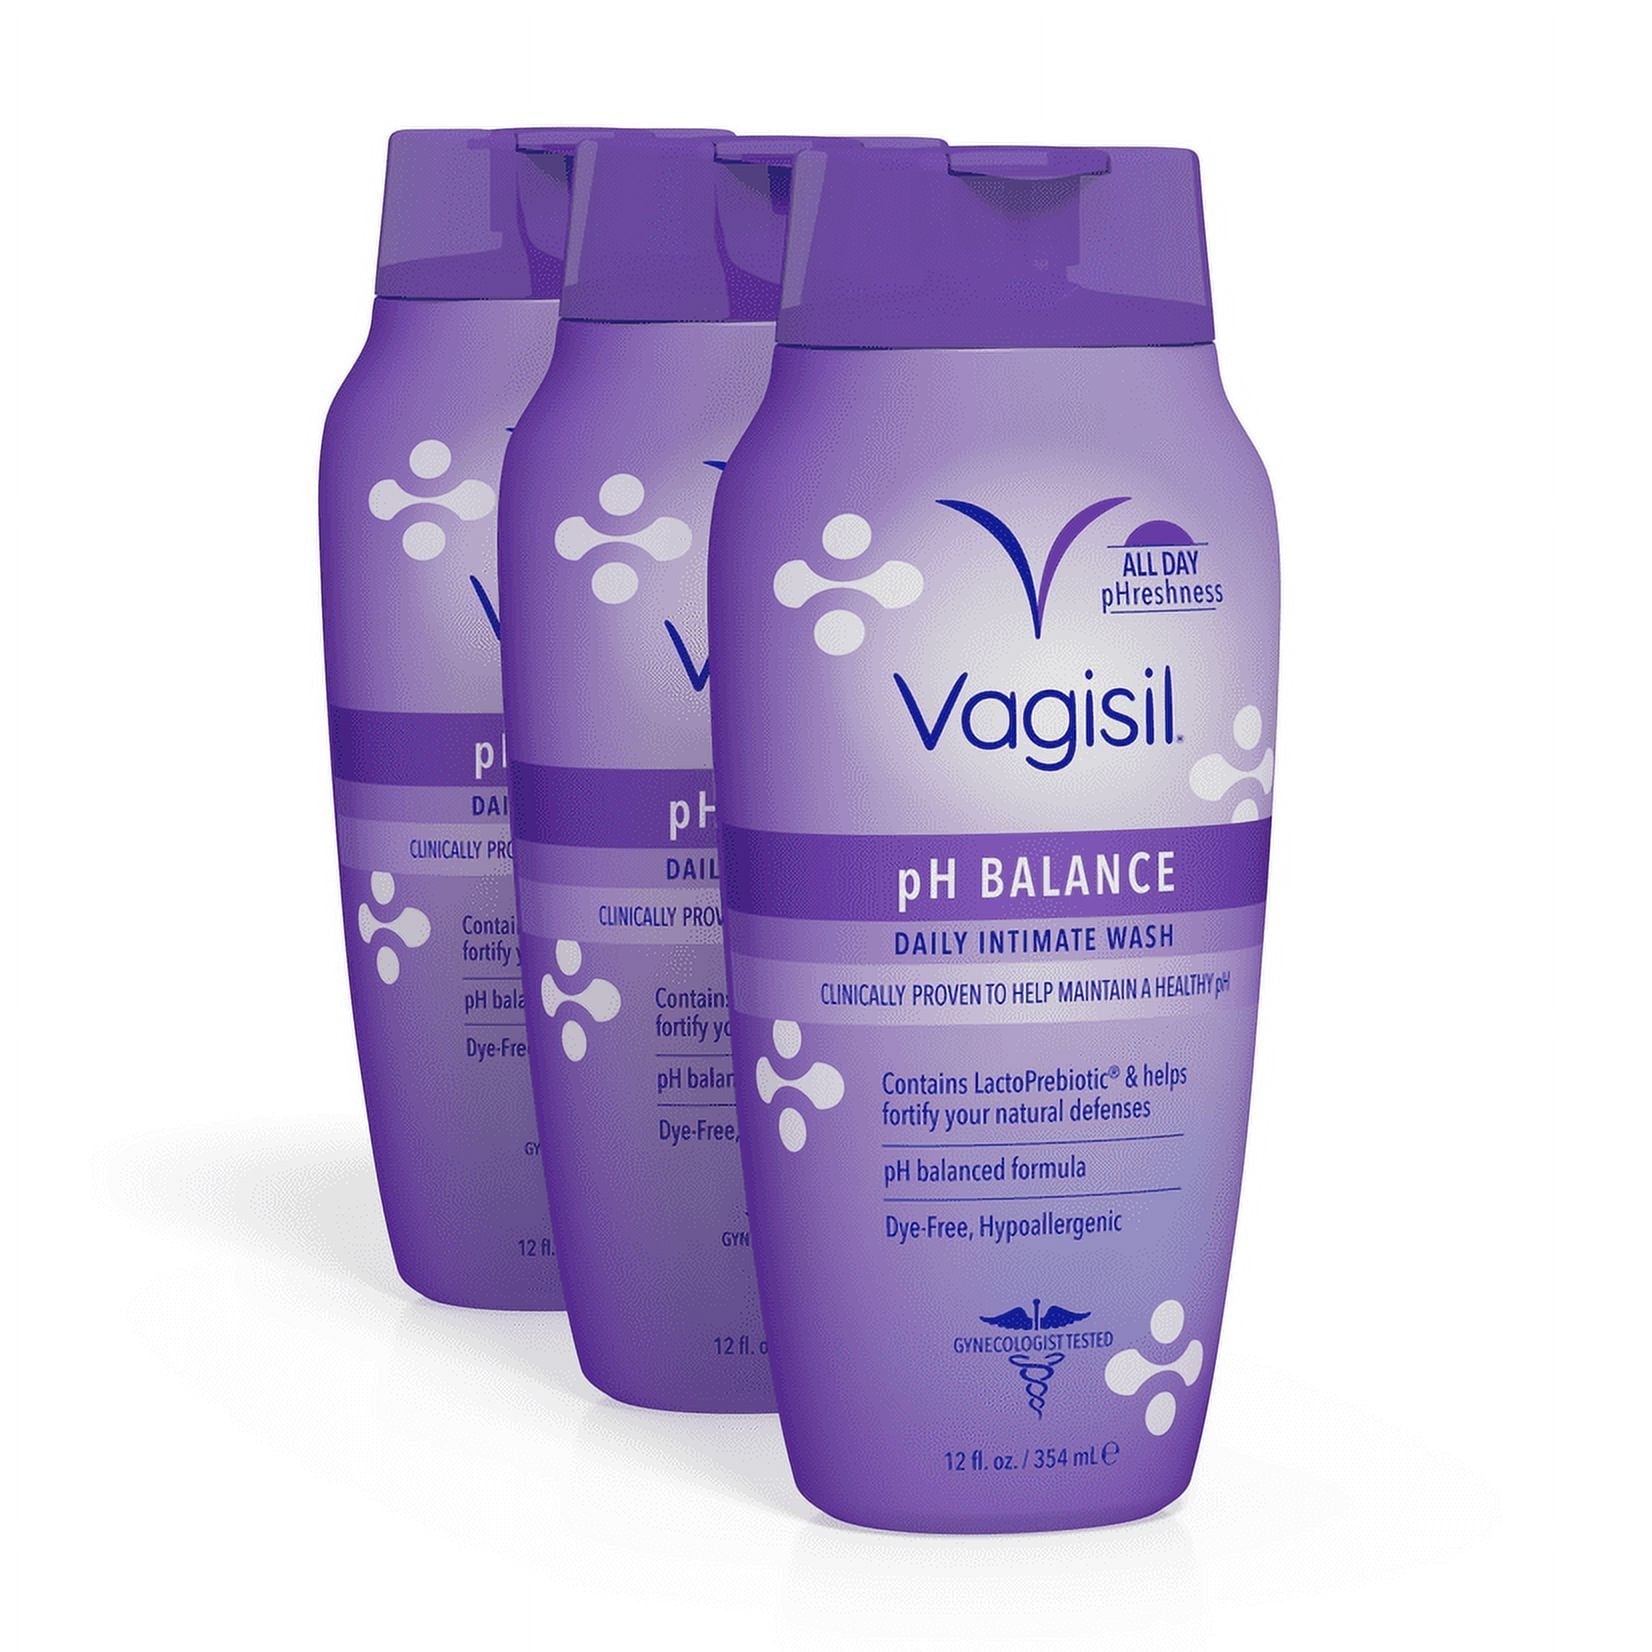 Wholesale prices with free shipping all over United States Vagisil PH Balance Daily Intimate Vaginal Feminine Wash, 12 oz, 3 Pack - Steven Deals